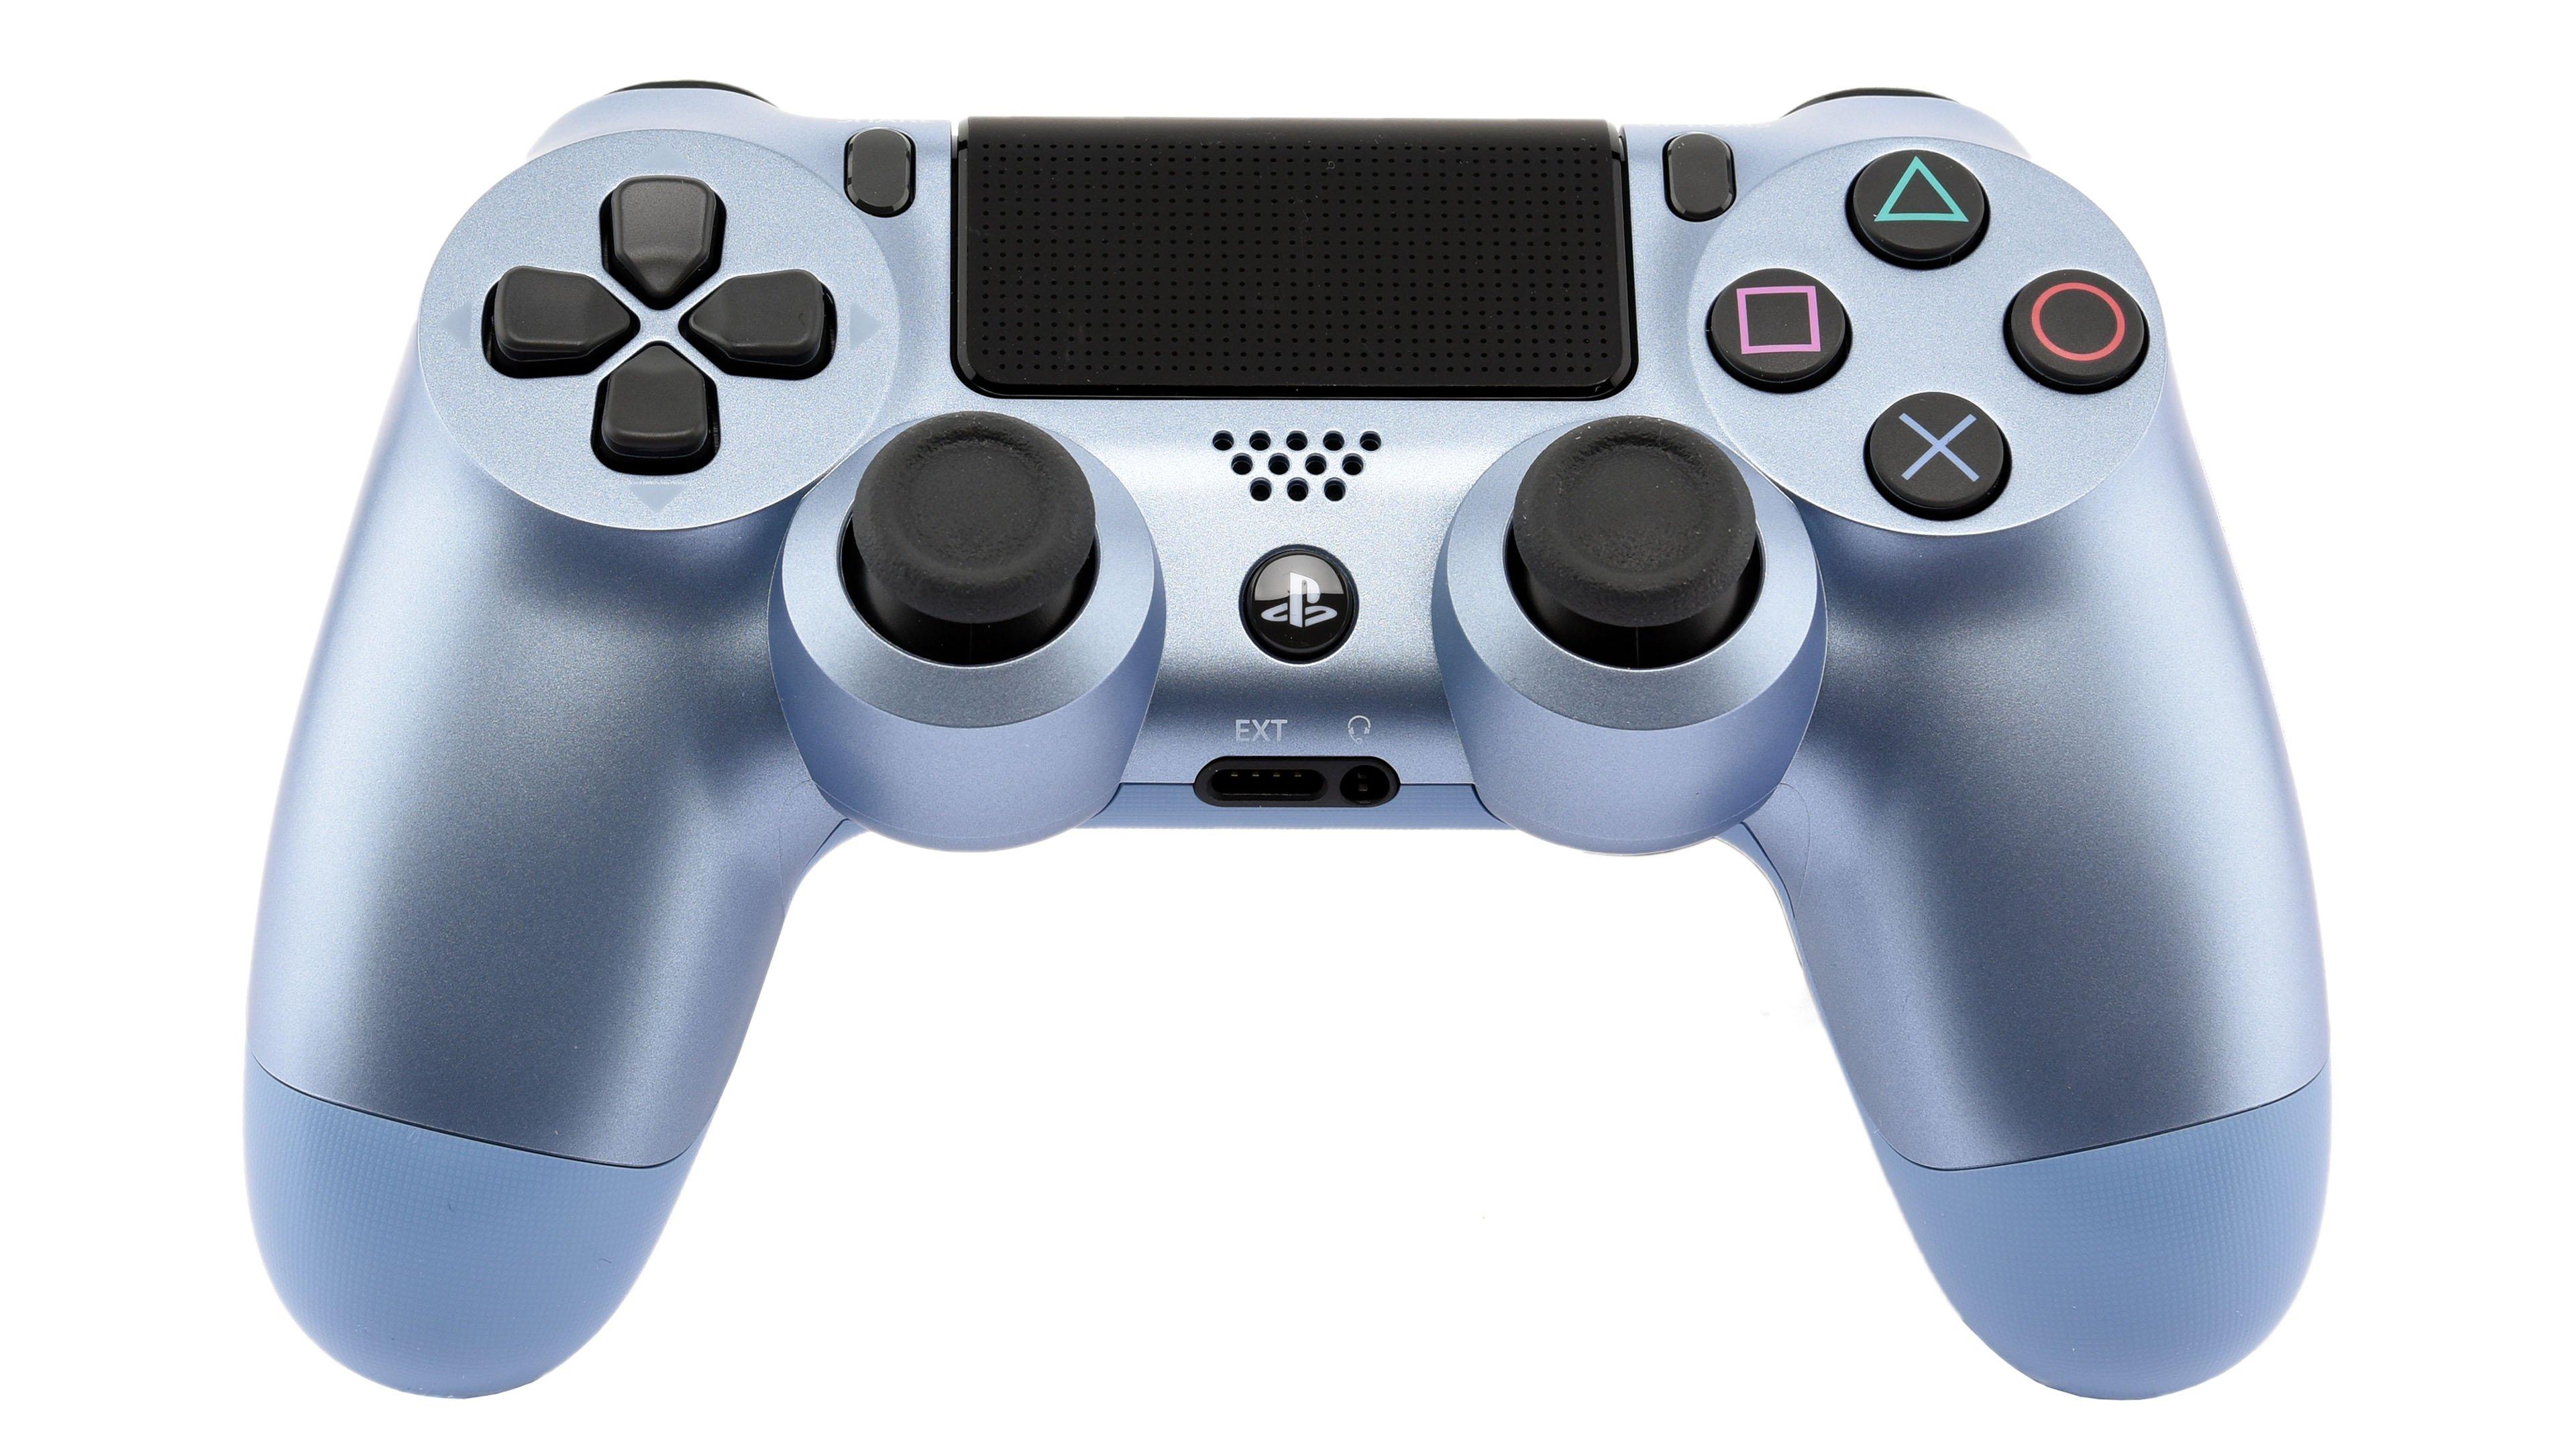 silver and blue ps4 controller